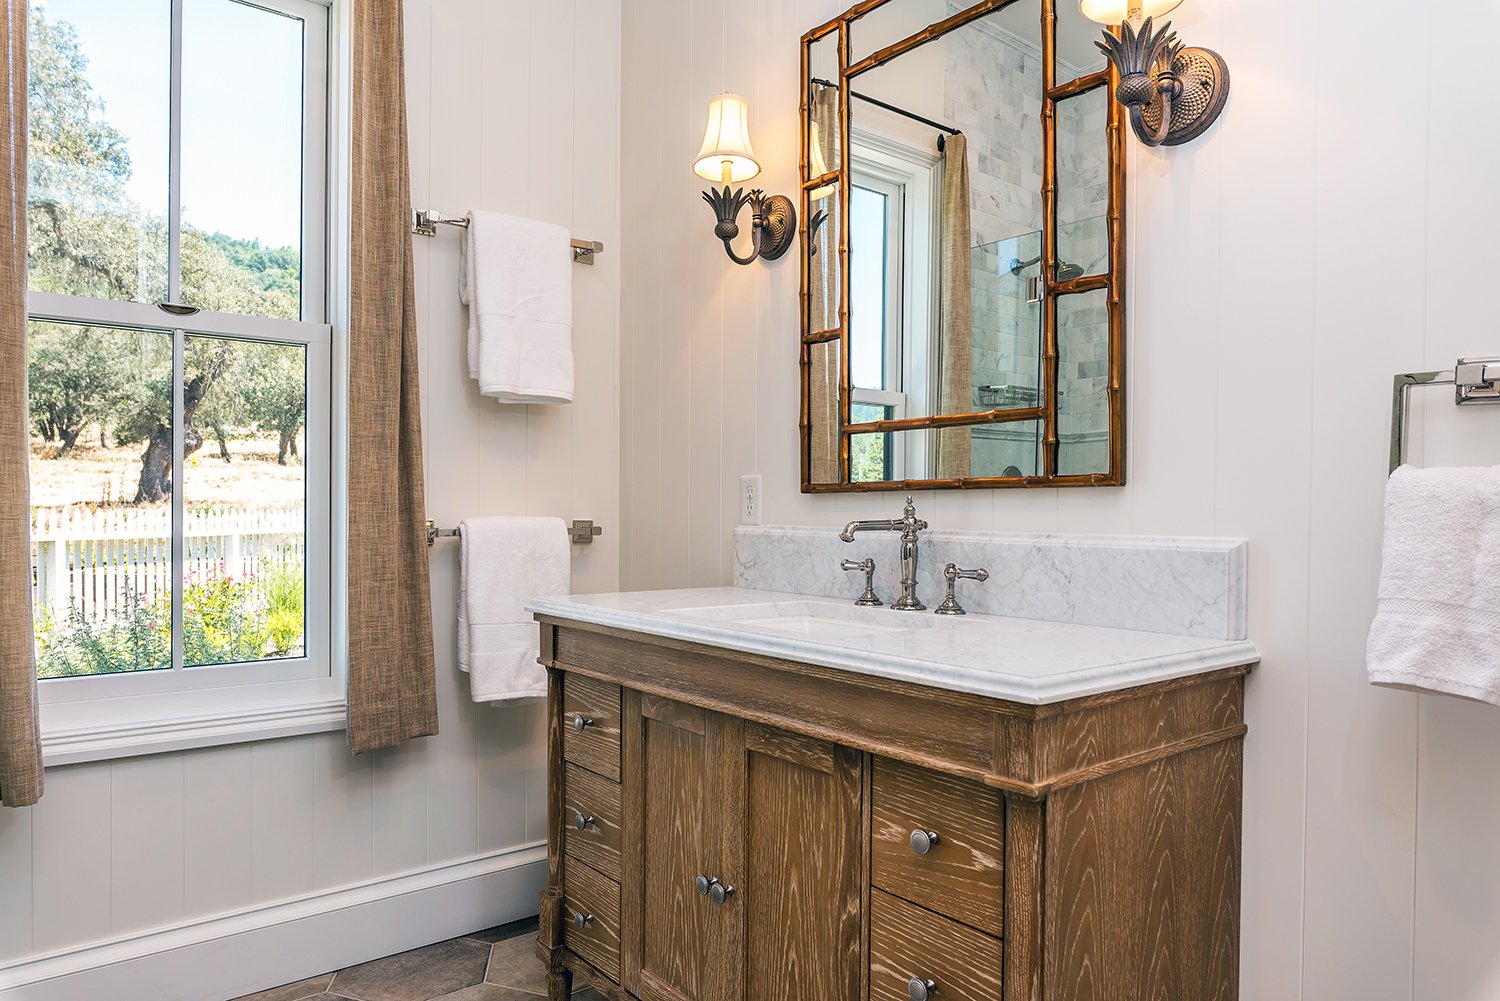  A bathroom with silver fixtures, an antique mirror, and wooden vanity.  